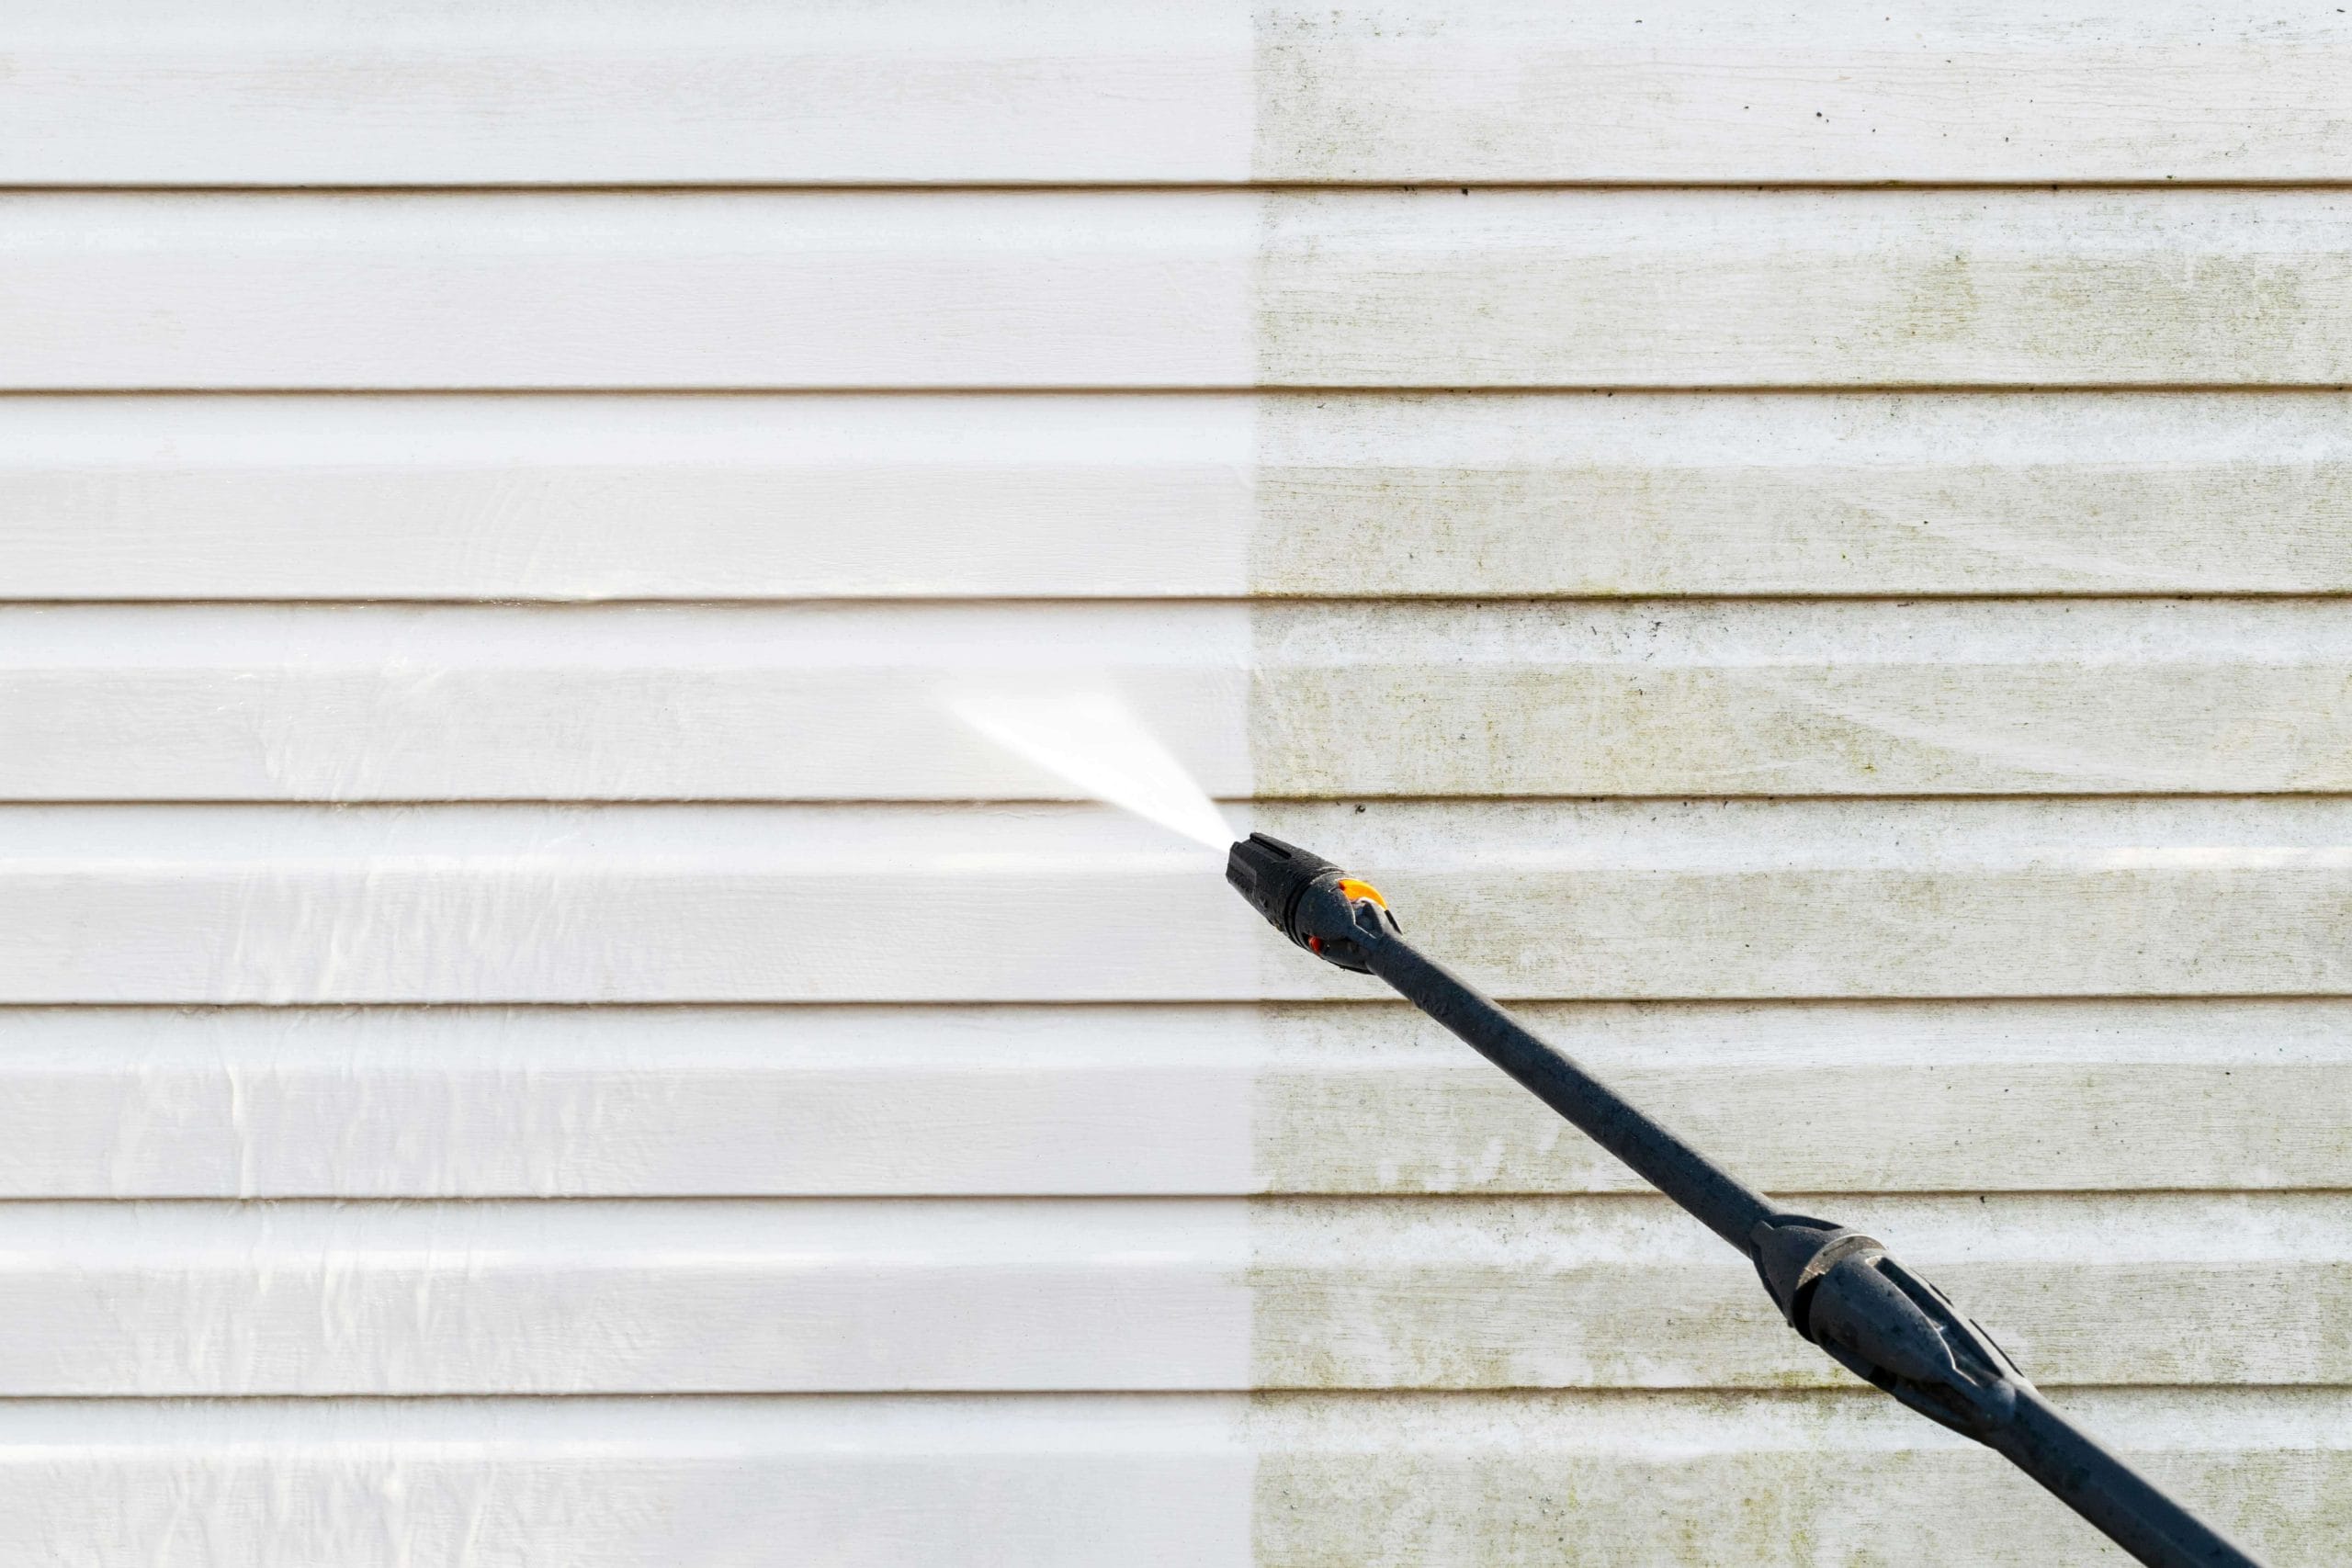 Residential exterior power washing in Phoenix, AZ: Before and after transformation.